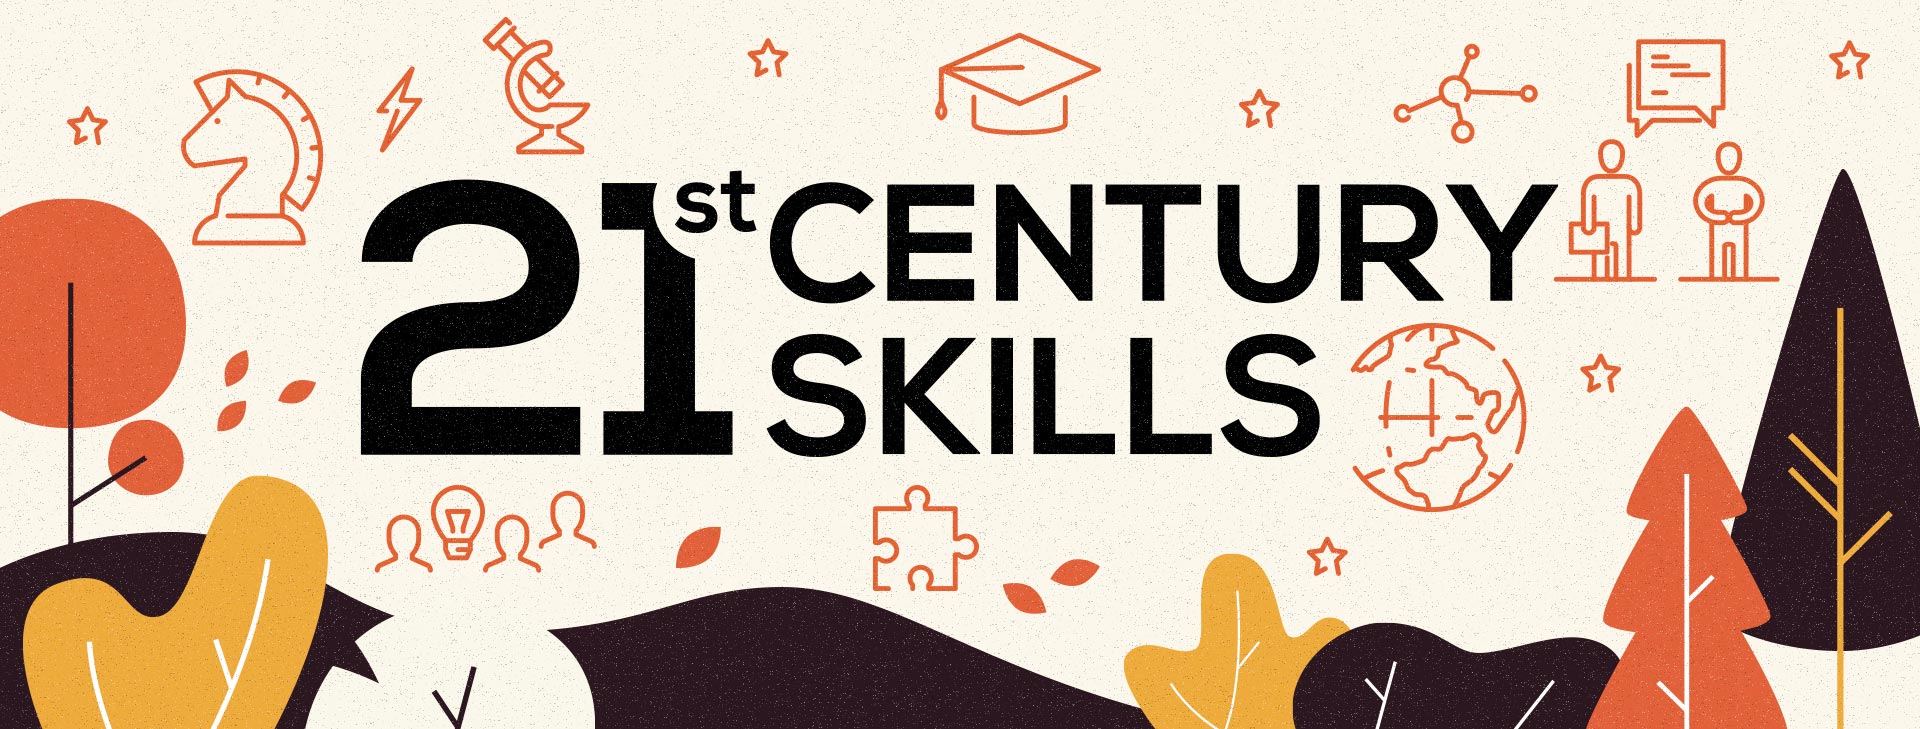 Instructing & Assessing 21st Century Skills: A Focus on Self-Directed Learning